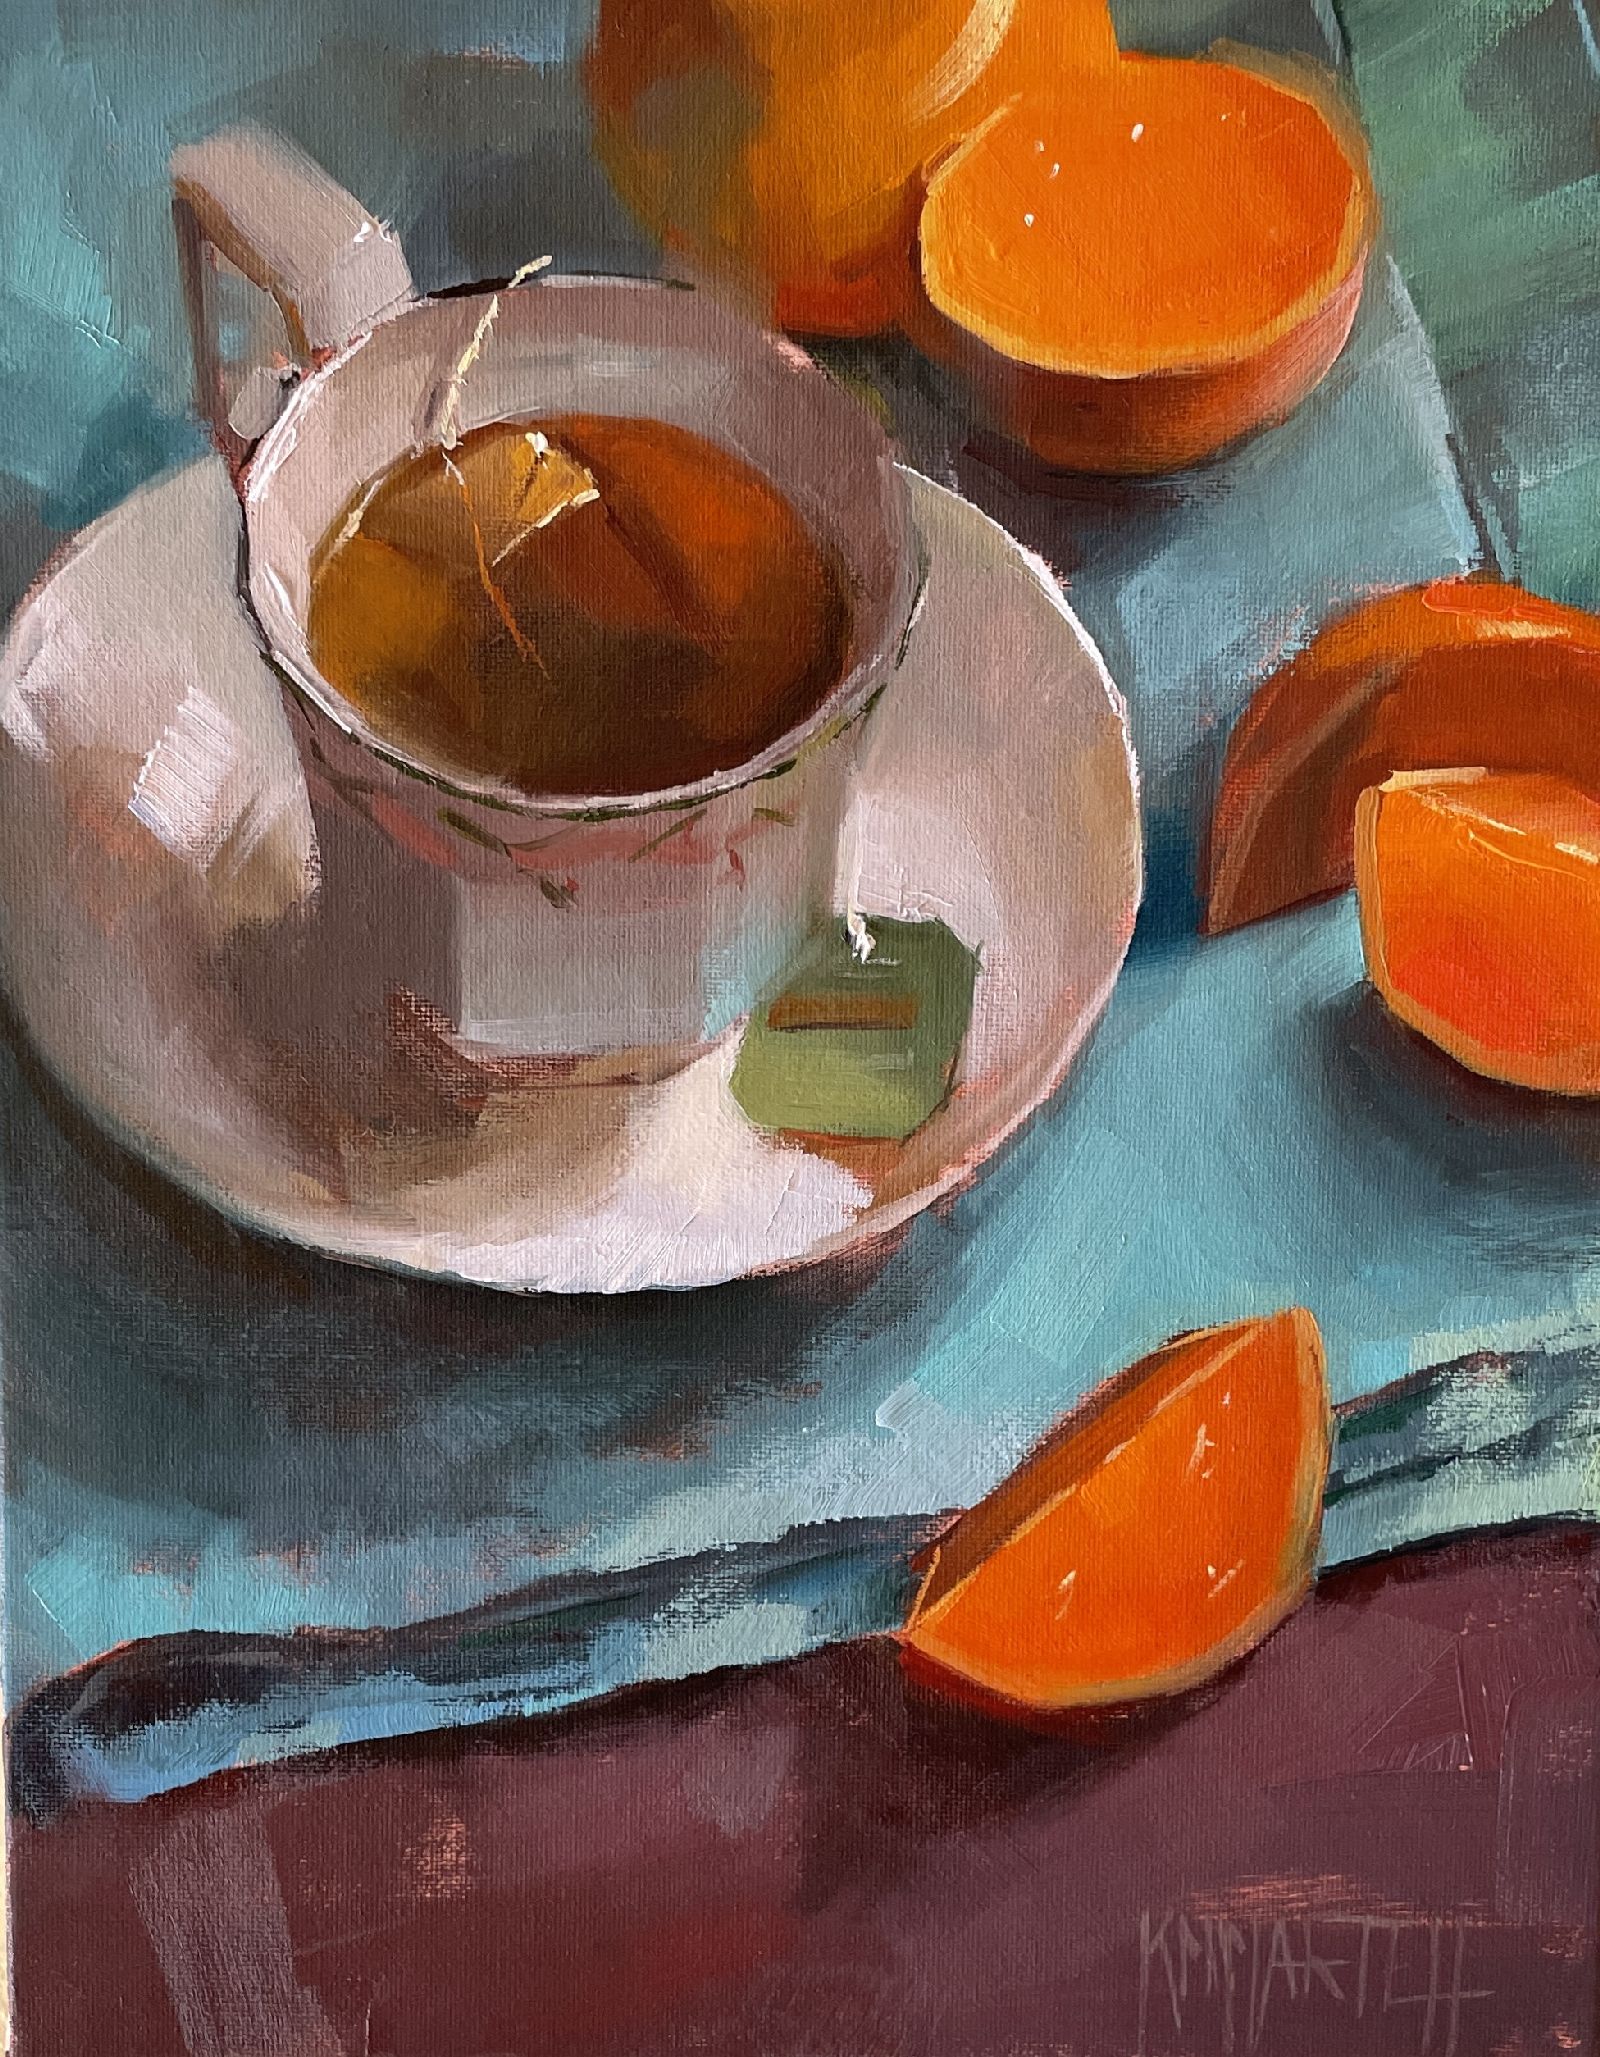 Tea for Oranges by Kayla Martell